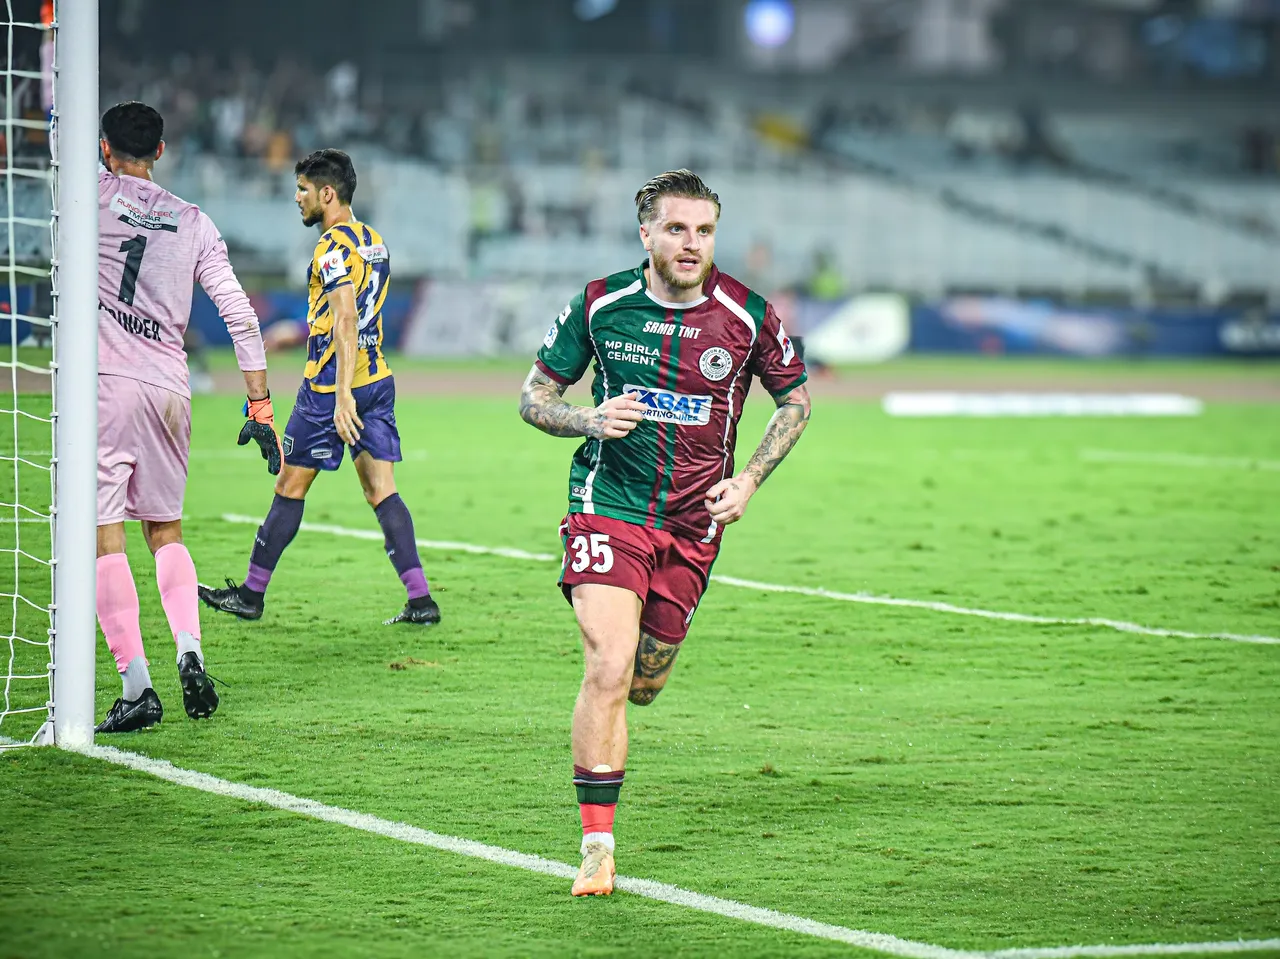 Mohun Bagan vs Odisha FC: Jason Cummings scored in the first half and it's all square on aggregate at the break.  